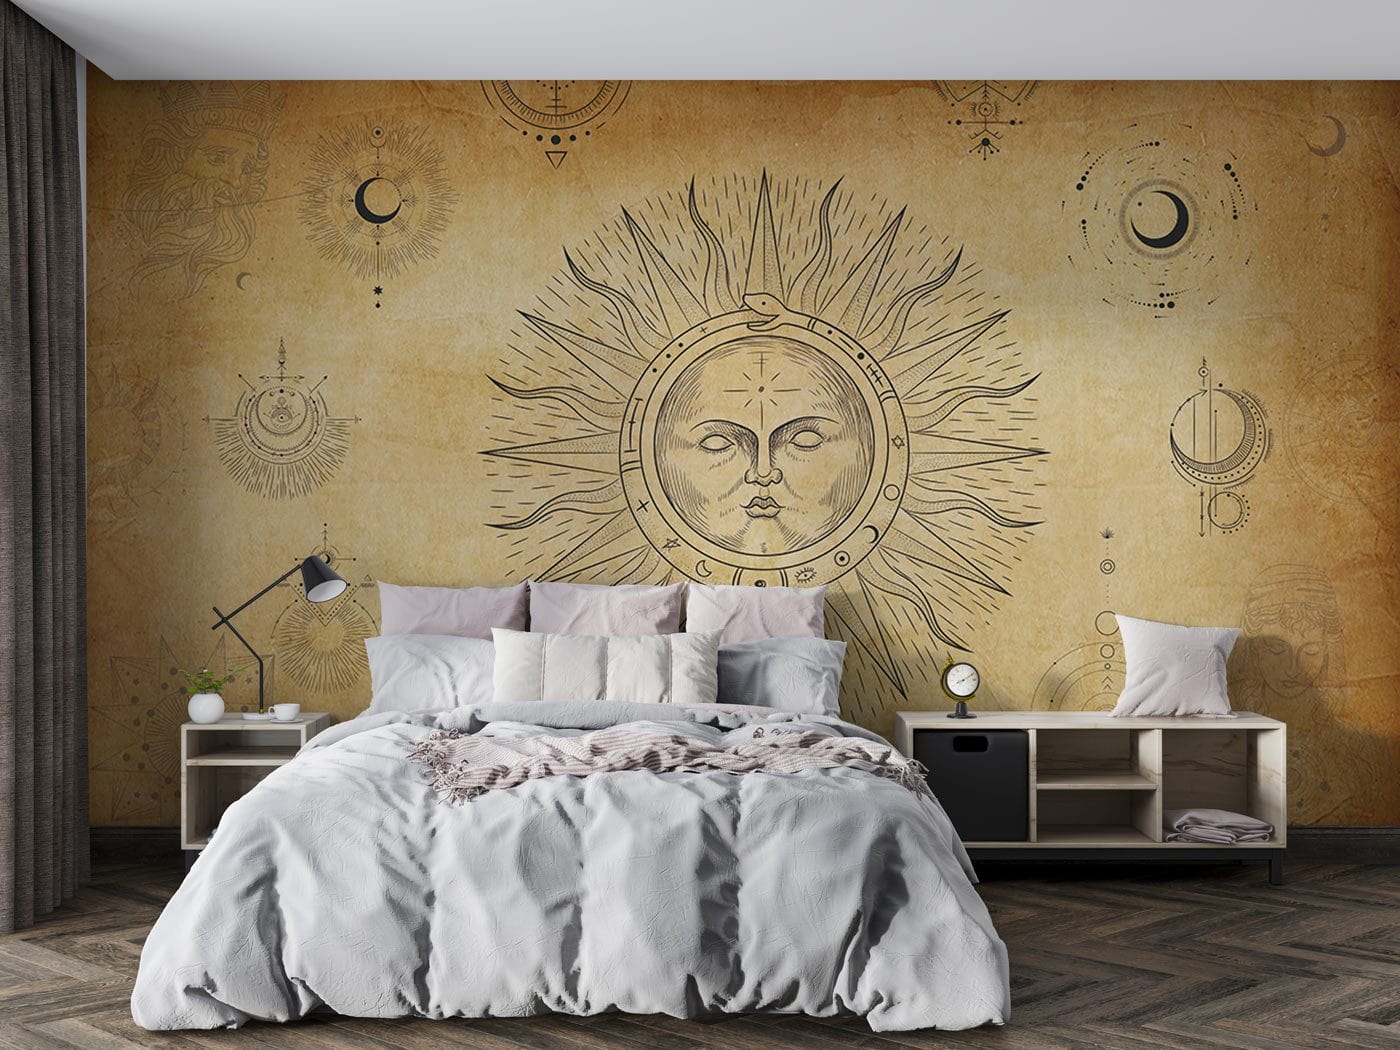 Sun Art Pattern Wallpaper Mural for Use in the Decoration of Bedrooms